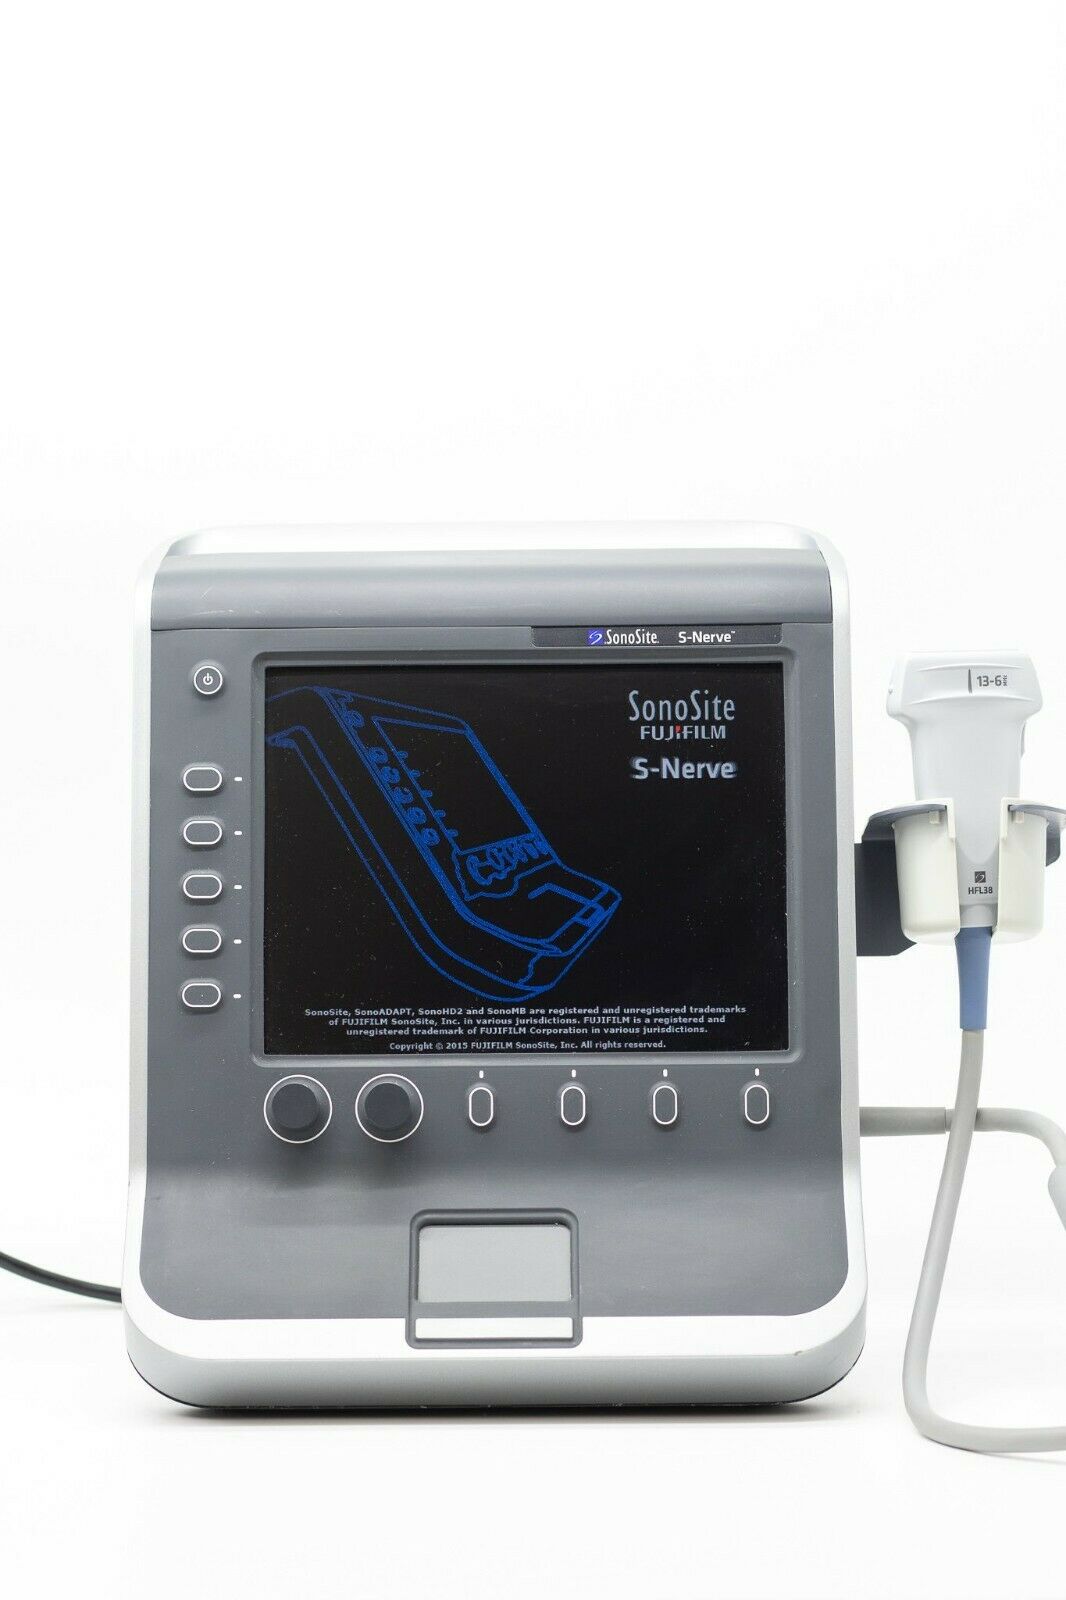 SONOSITE FUJIFILM S-NERVE ULTRASOUND PORTABLE SYSTEM - NEEDLE GUIDED INJECTIONS DIAGNOSTIC ULTRASOUND MACHINES FOR SALE